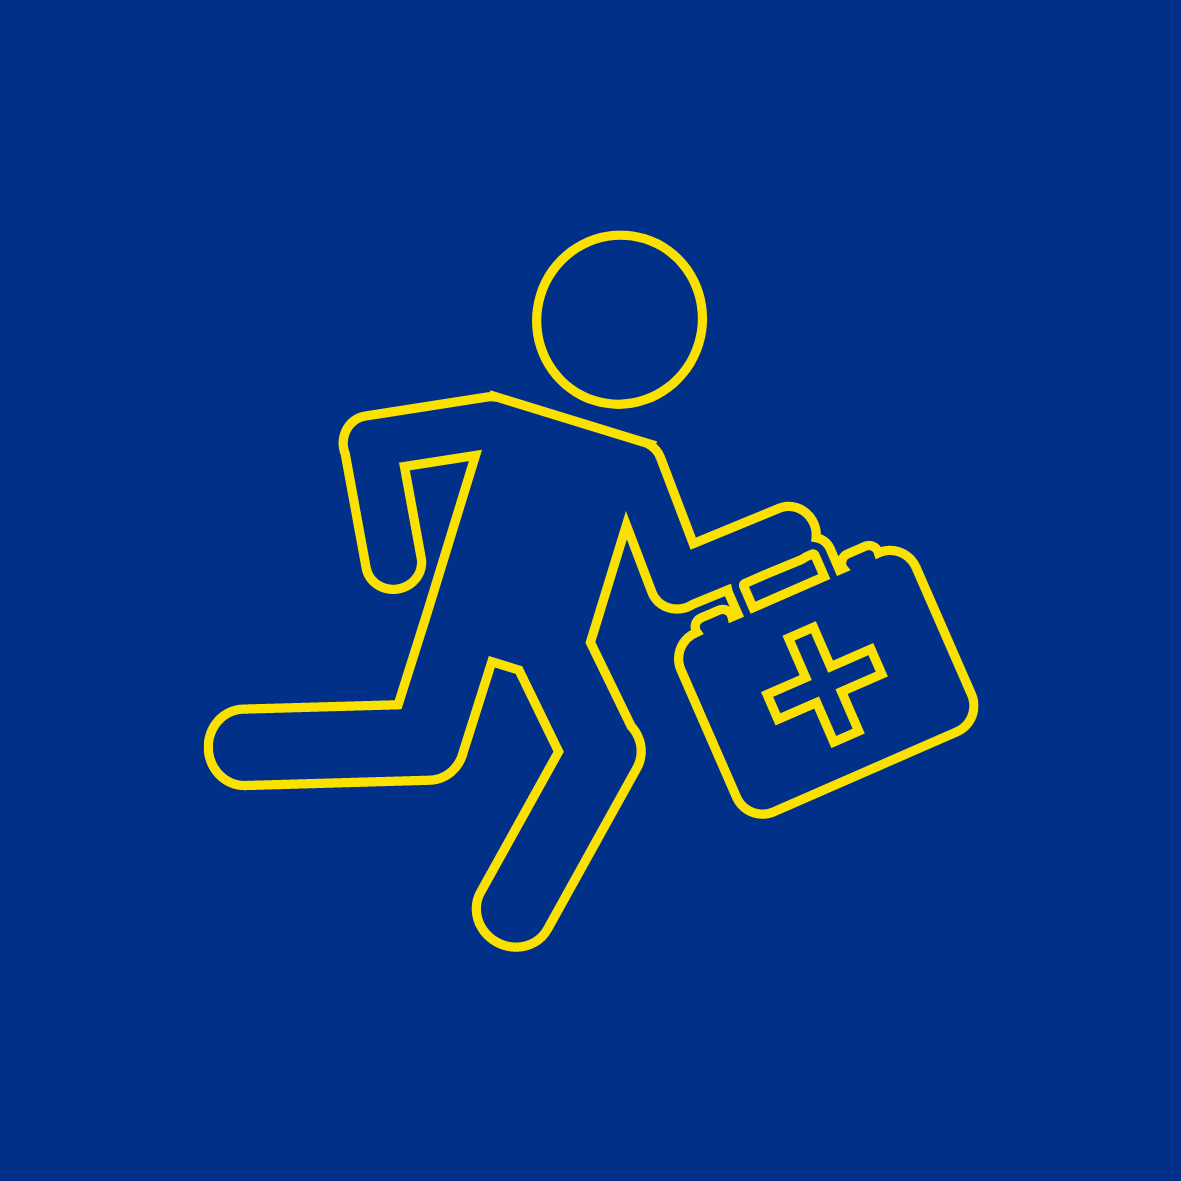 Outline of Paramedic Running With Medical Bag